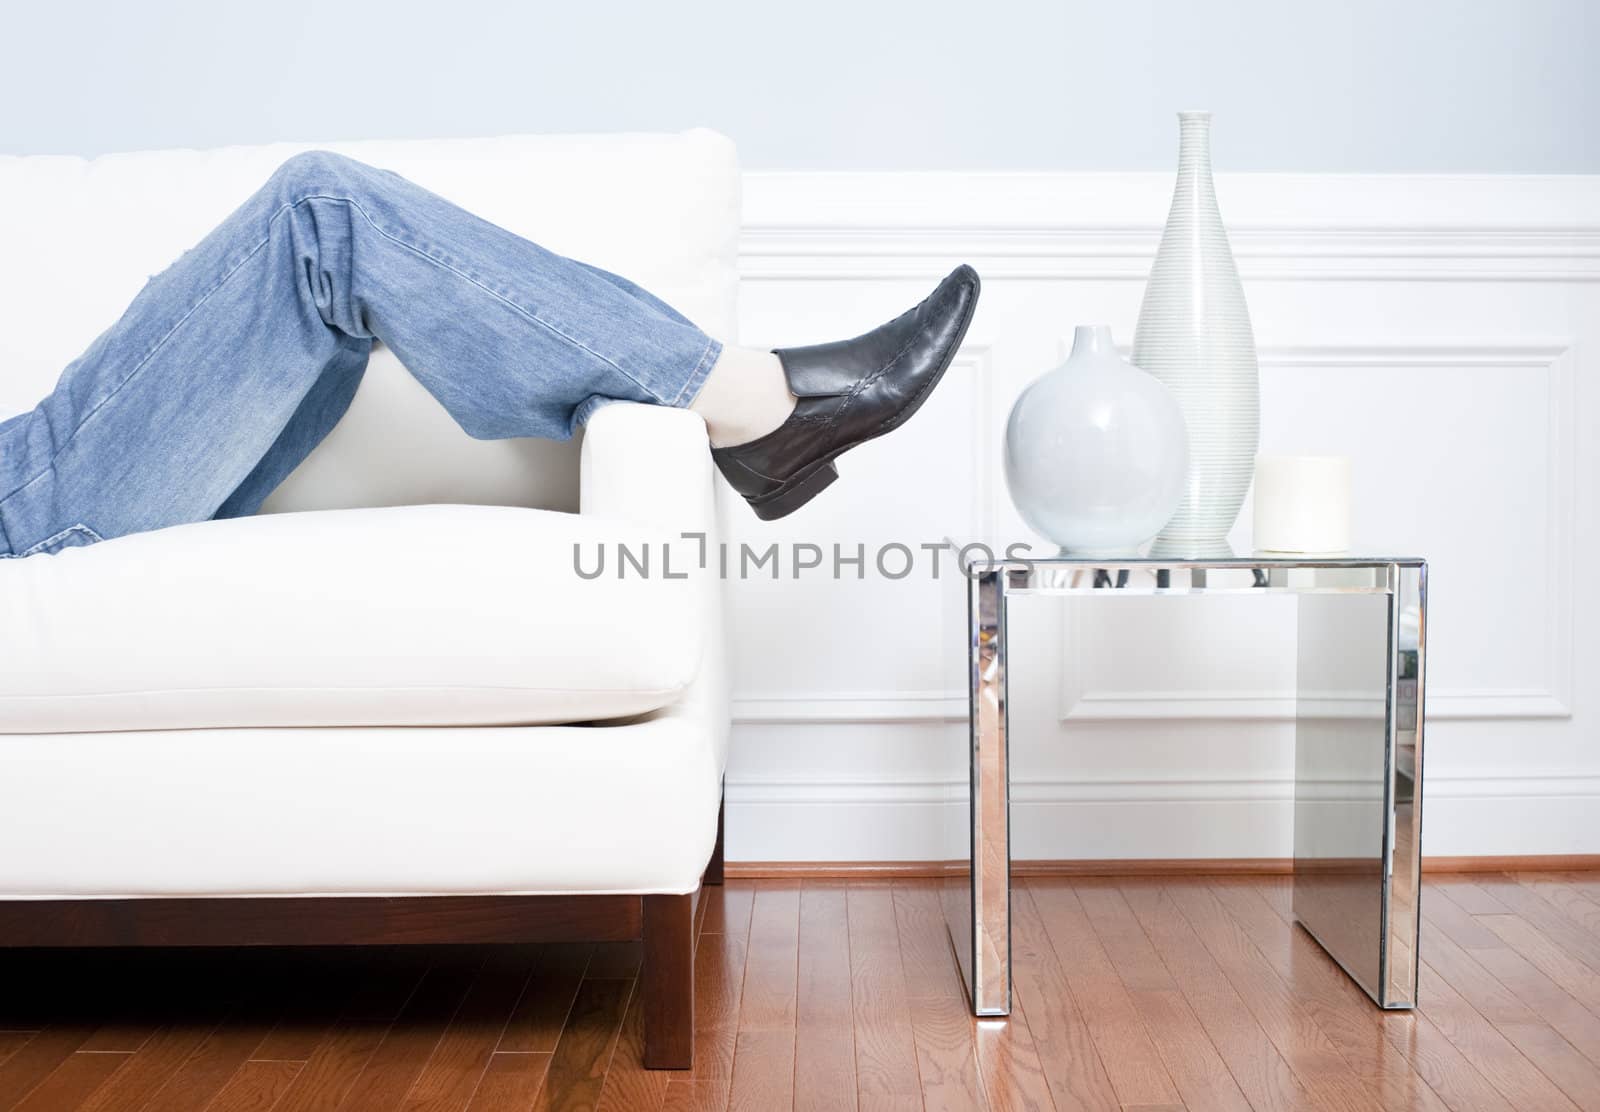 Cropped view of man reclining on white couch next to an end table holding vases, with only his legs visible. Horizontal format.